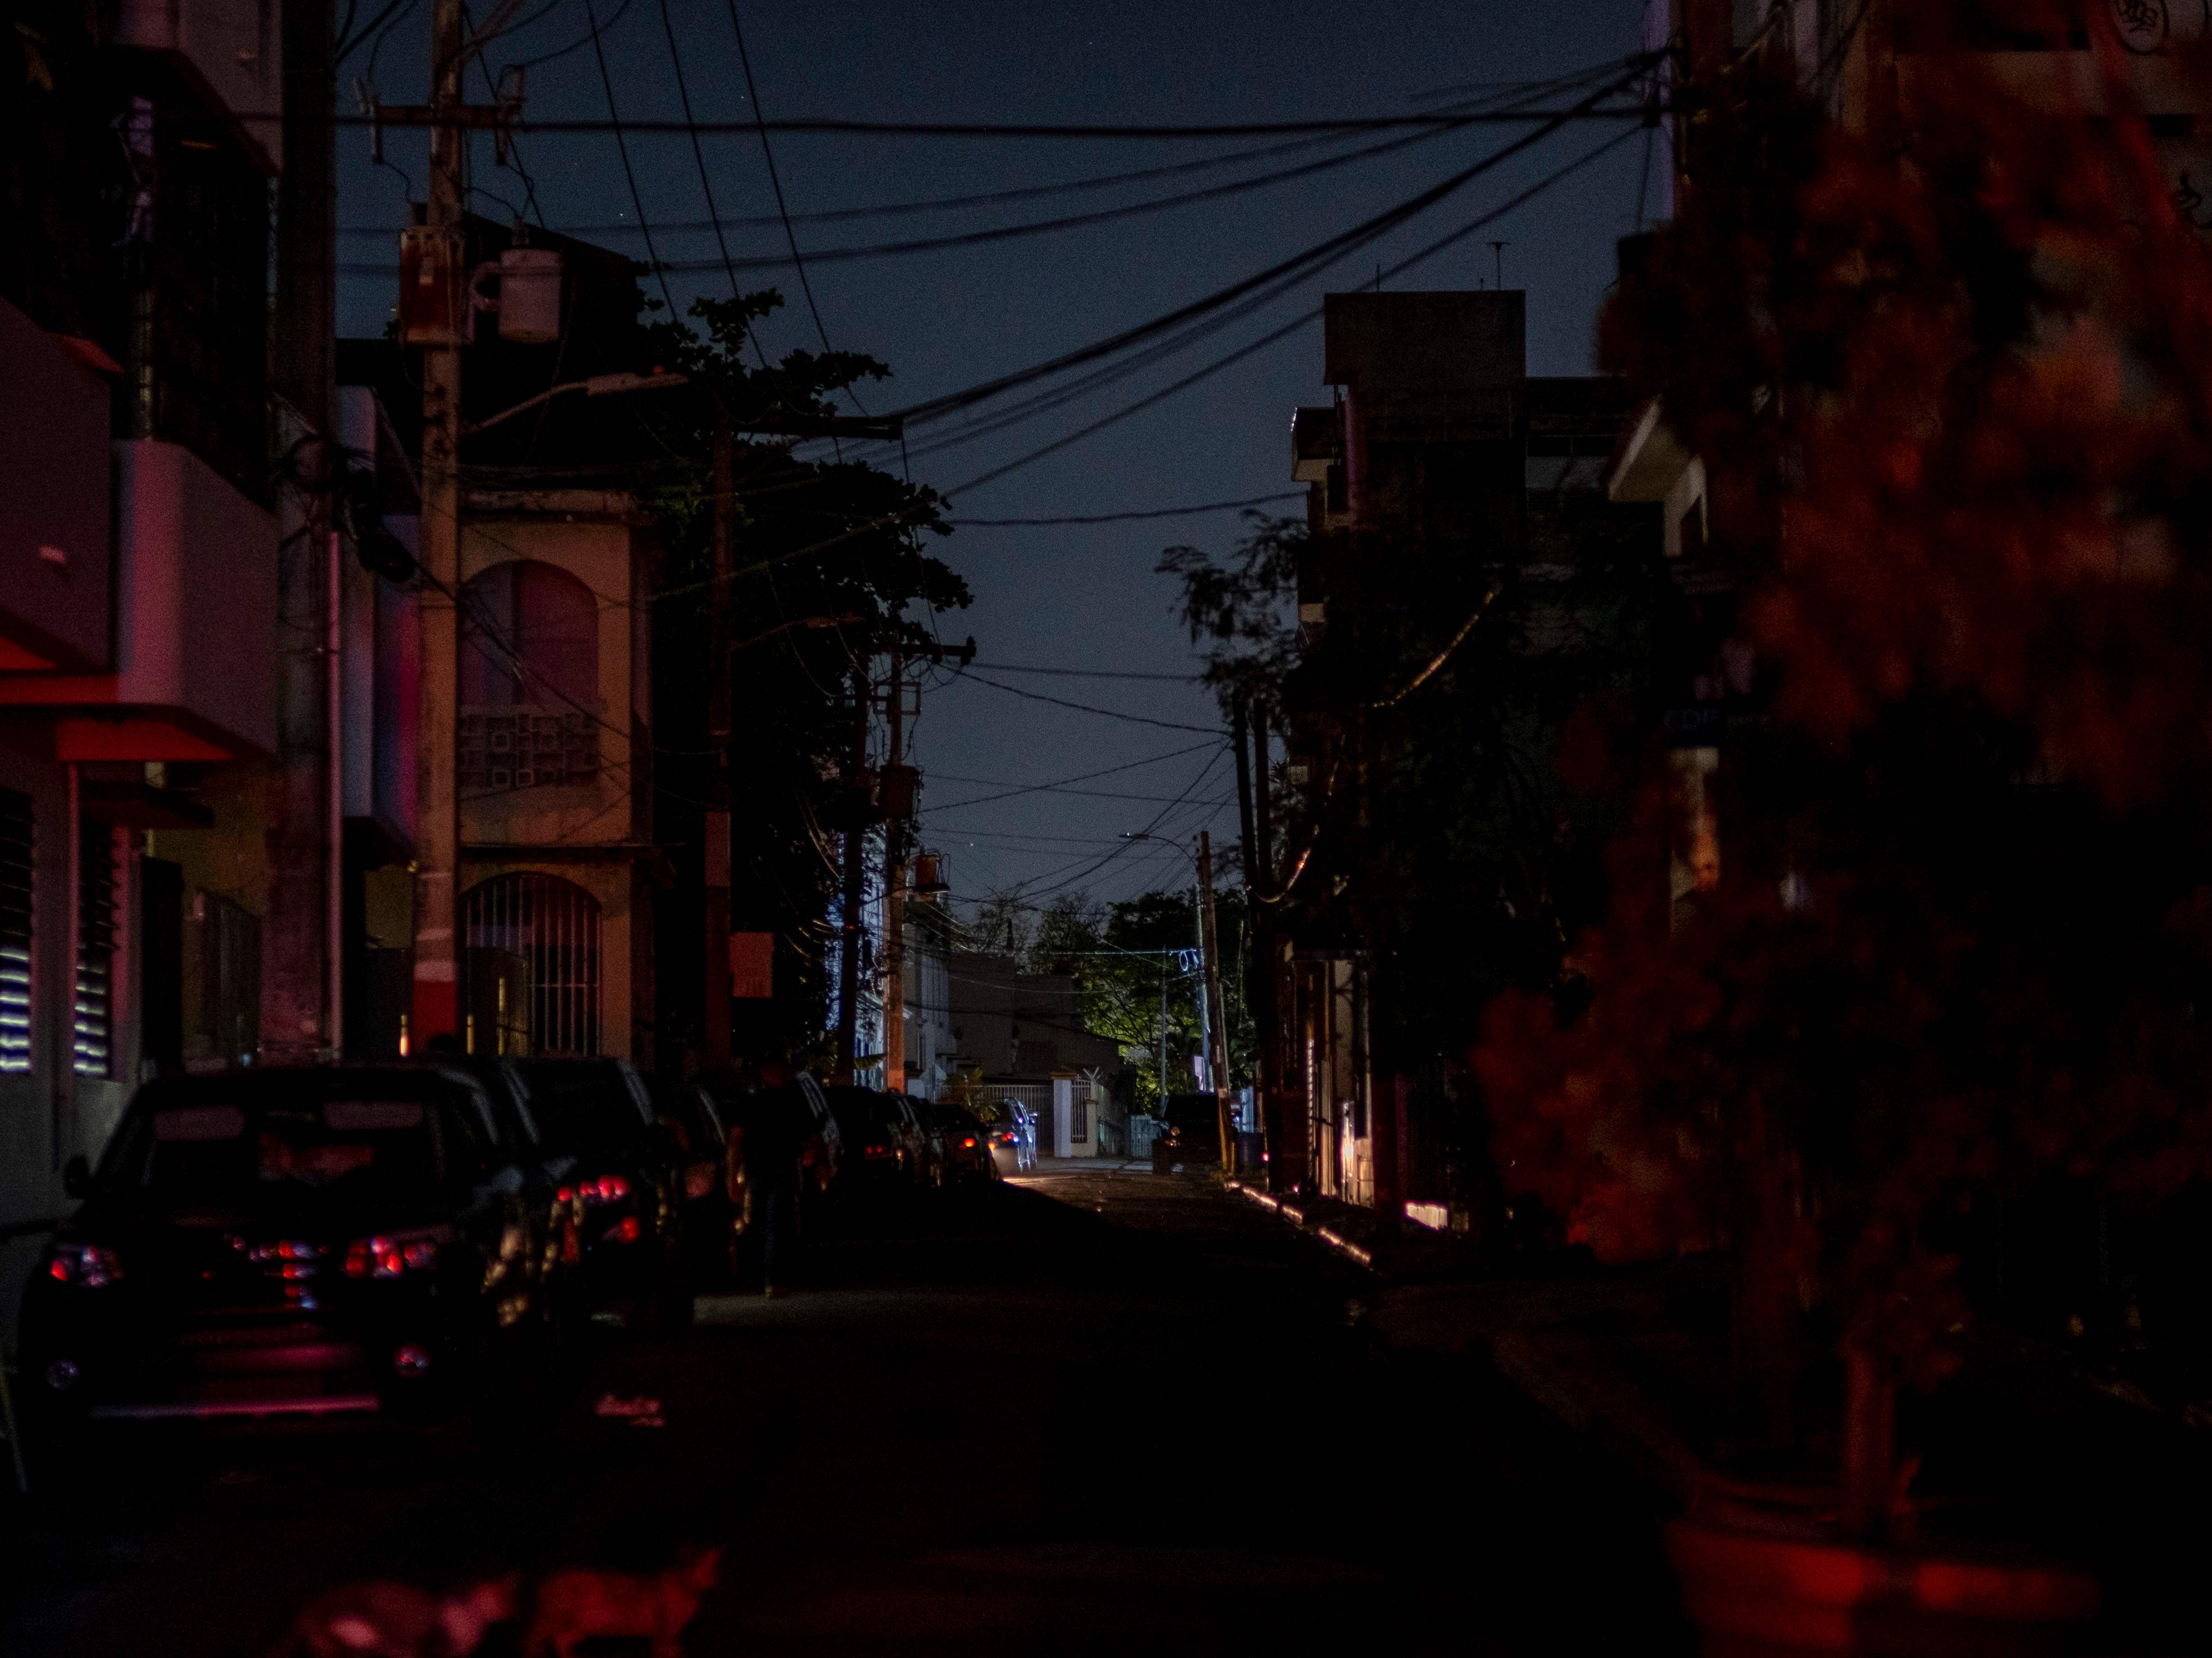 The streets of San Juan, Puerto Rico, during the power outage